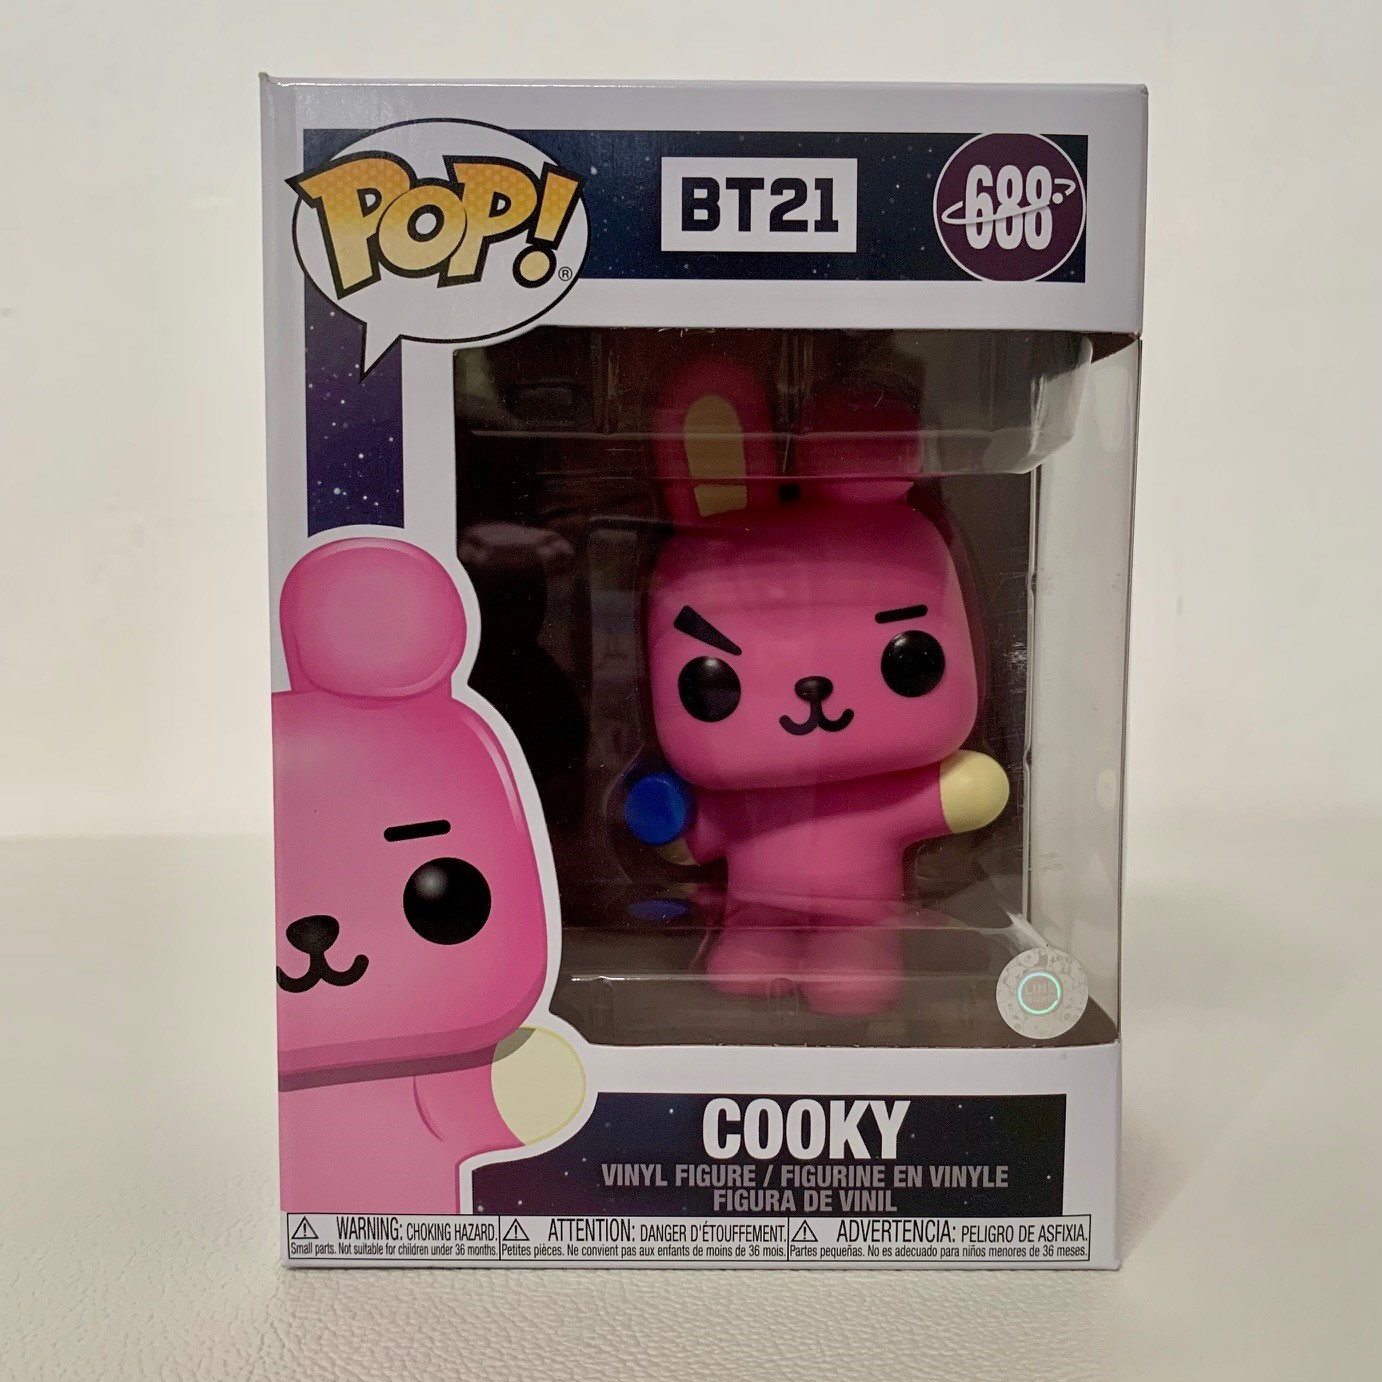 jord kaste støv i øjnene fly ORIGINAL BTS BT21 FUNKO POP 688 COOKY JUNGKOOK (ACTUAL PHOTO) FREE 0.50mm  THICK Funko Pop Protector / with GOLD SEAL of AUTHENTICITY / Purchased in  United States | Lazada PH